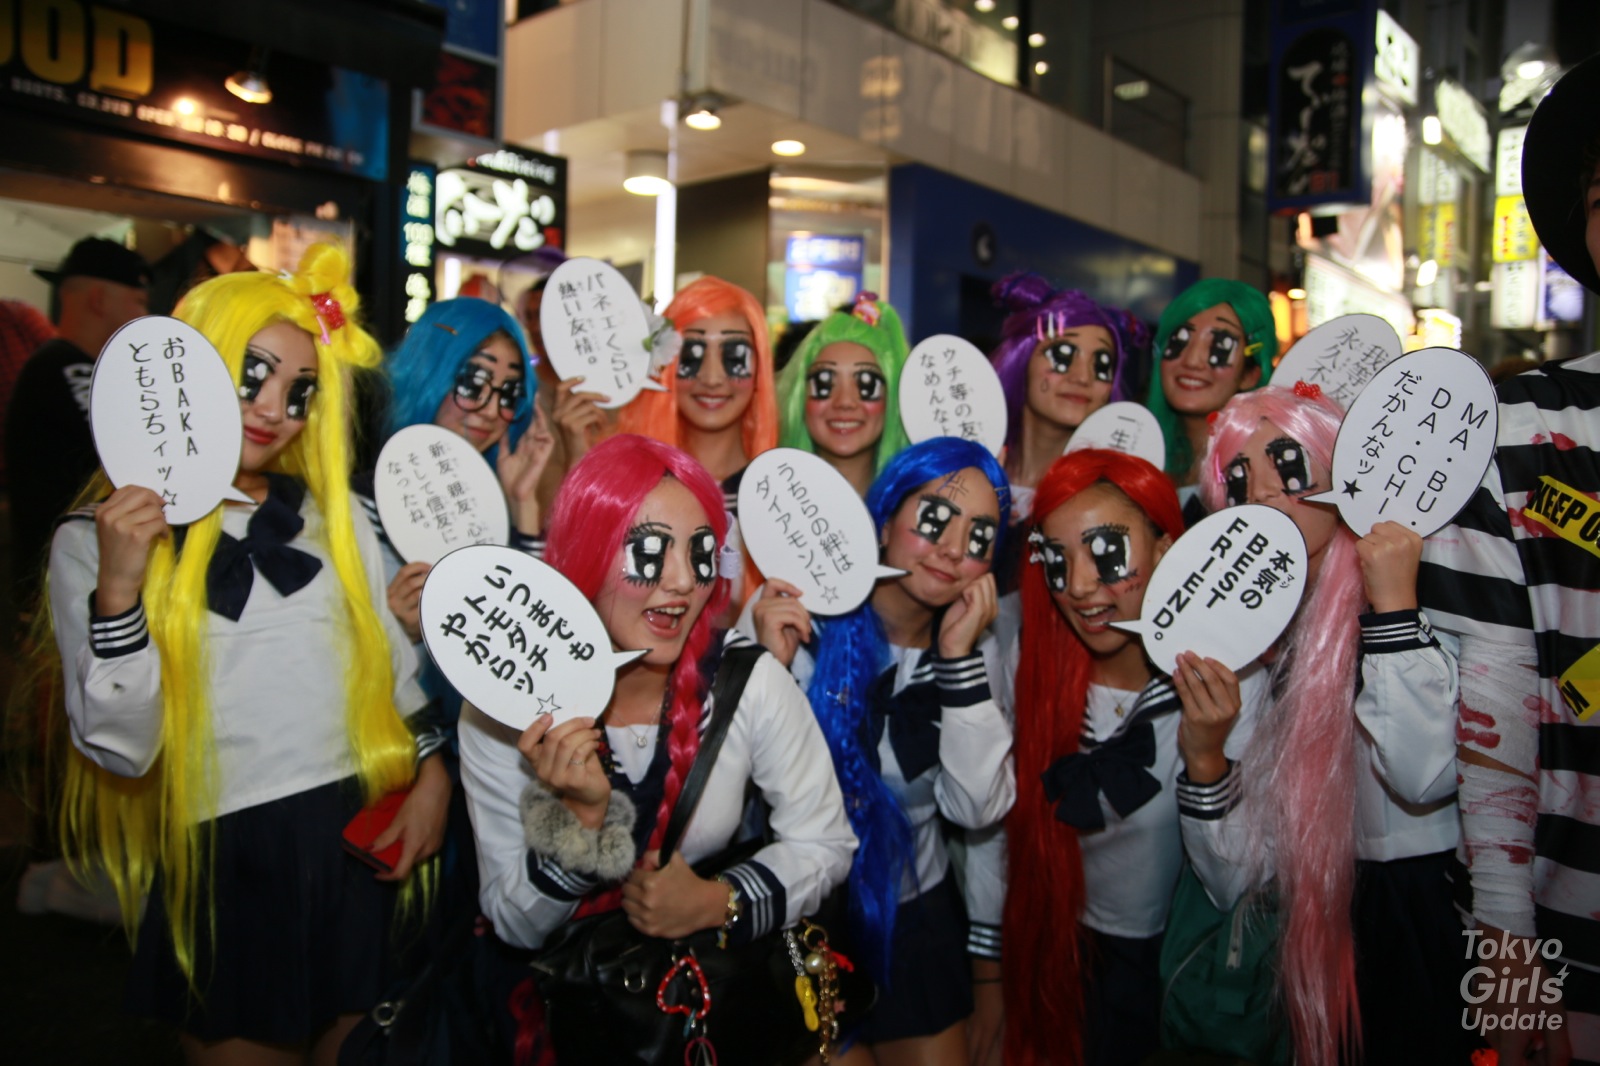 Halloween in Tokyo is World Largest Cosplay Summit : Shibuya Packed with Awesome Cosplayers!